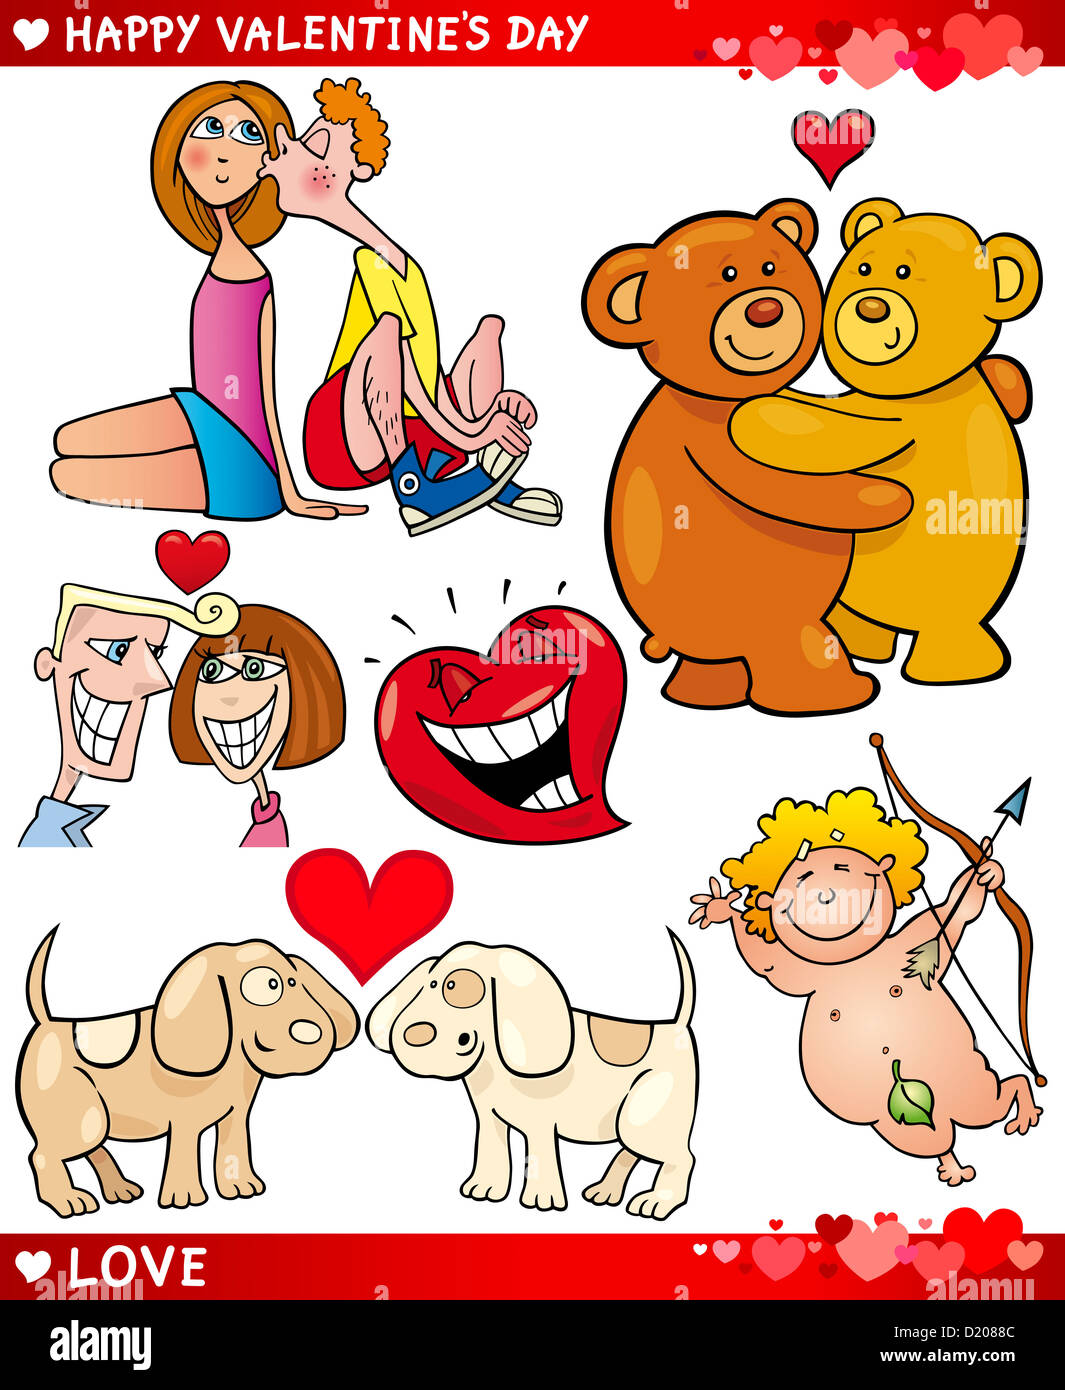 Cartoon Illustration of Cute Valentine's Day and Love Themes Collection Set Stock Photo